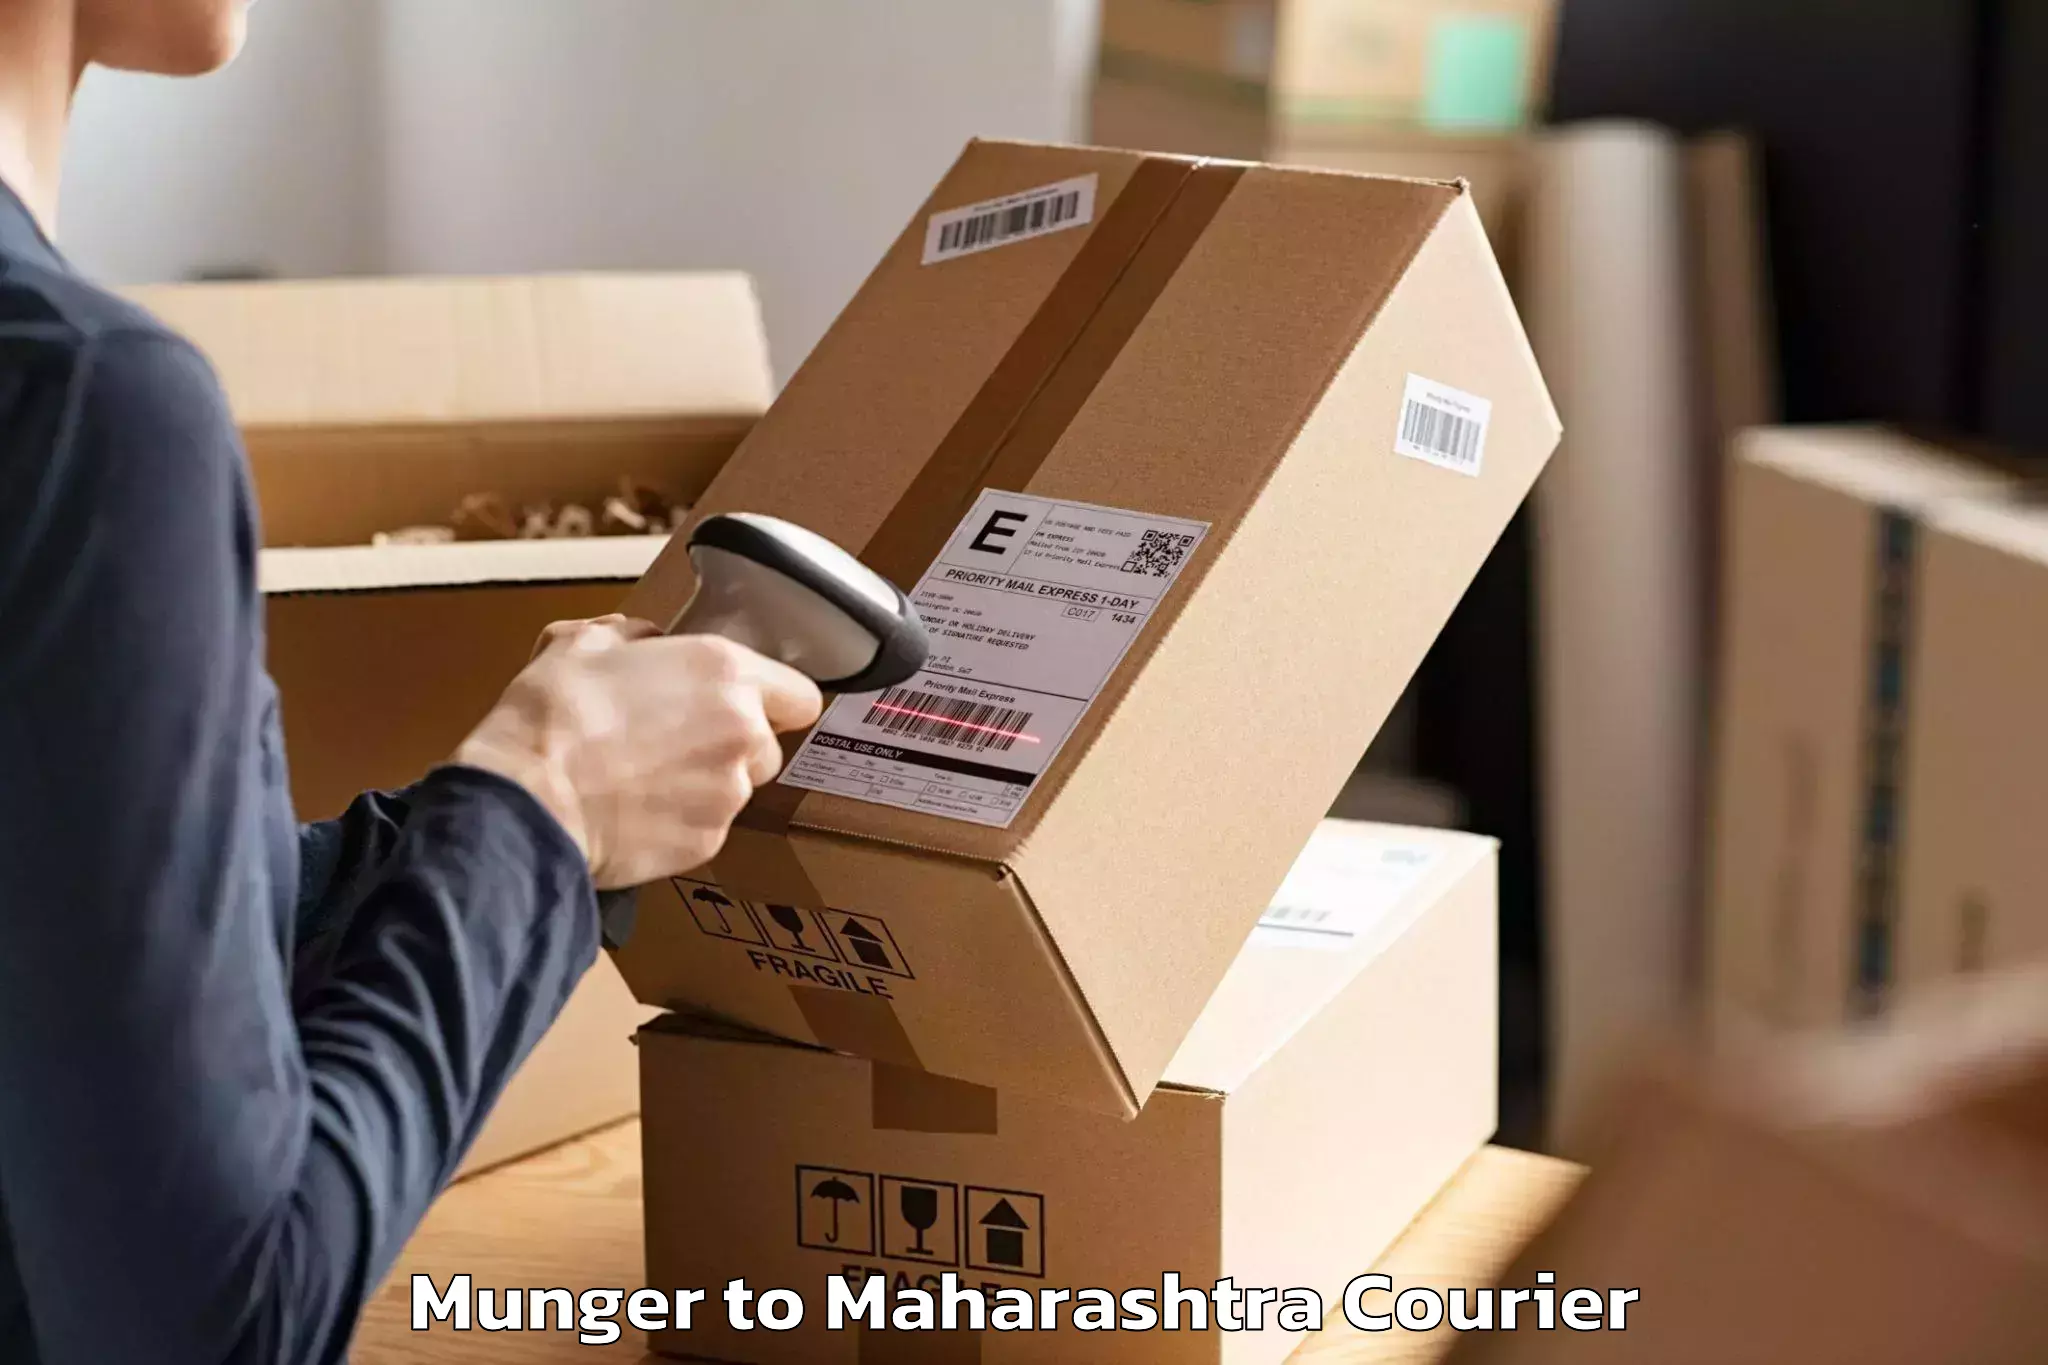 Trusted relocation experts Munger to Mumbai